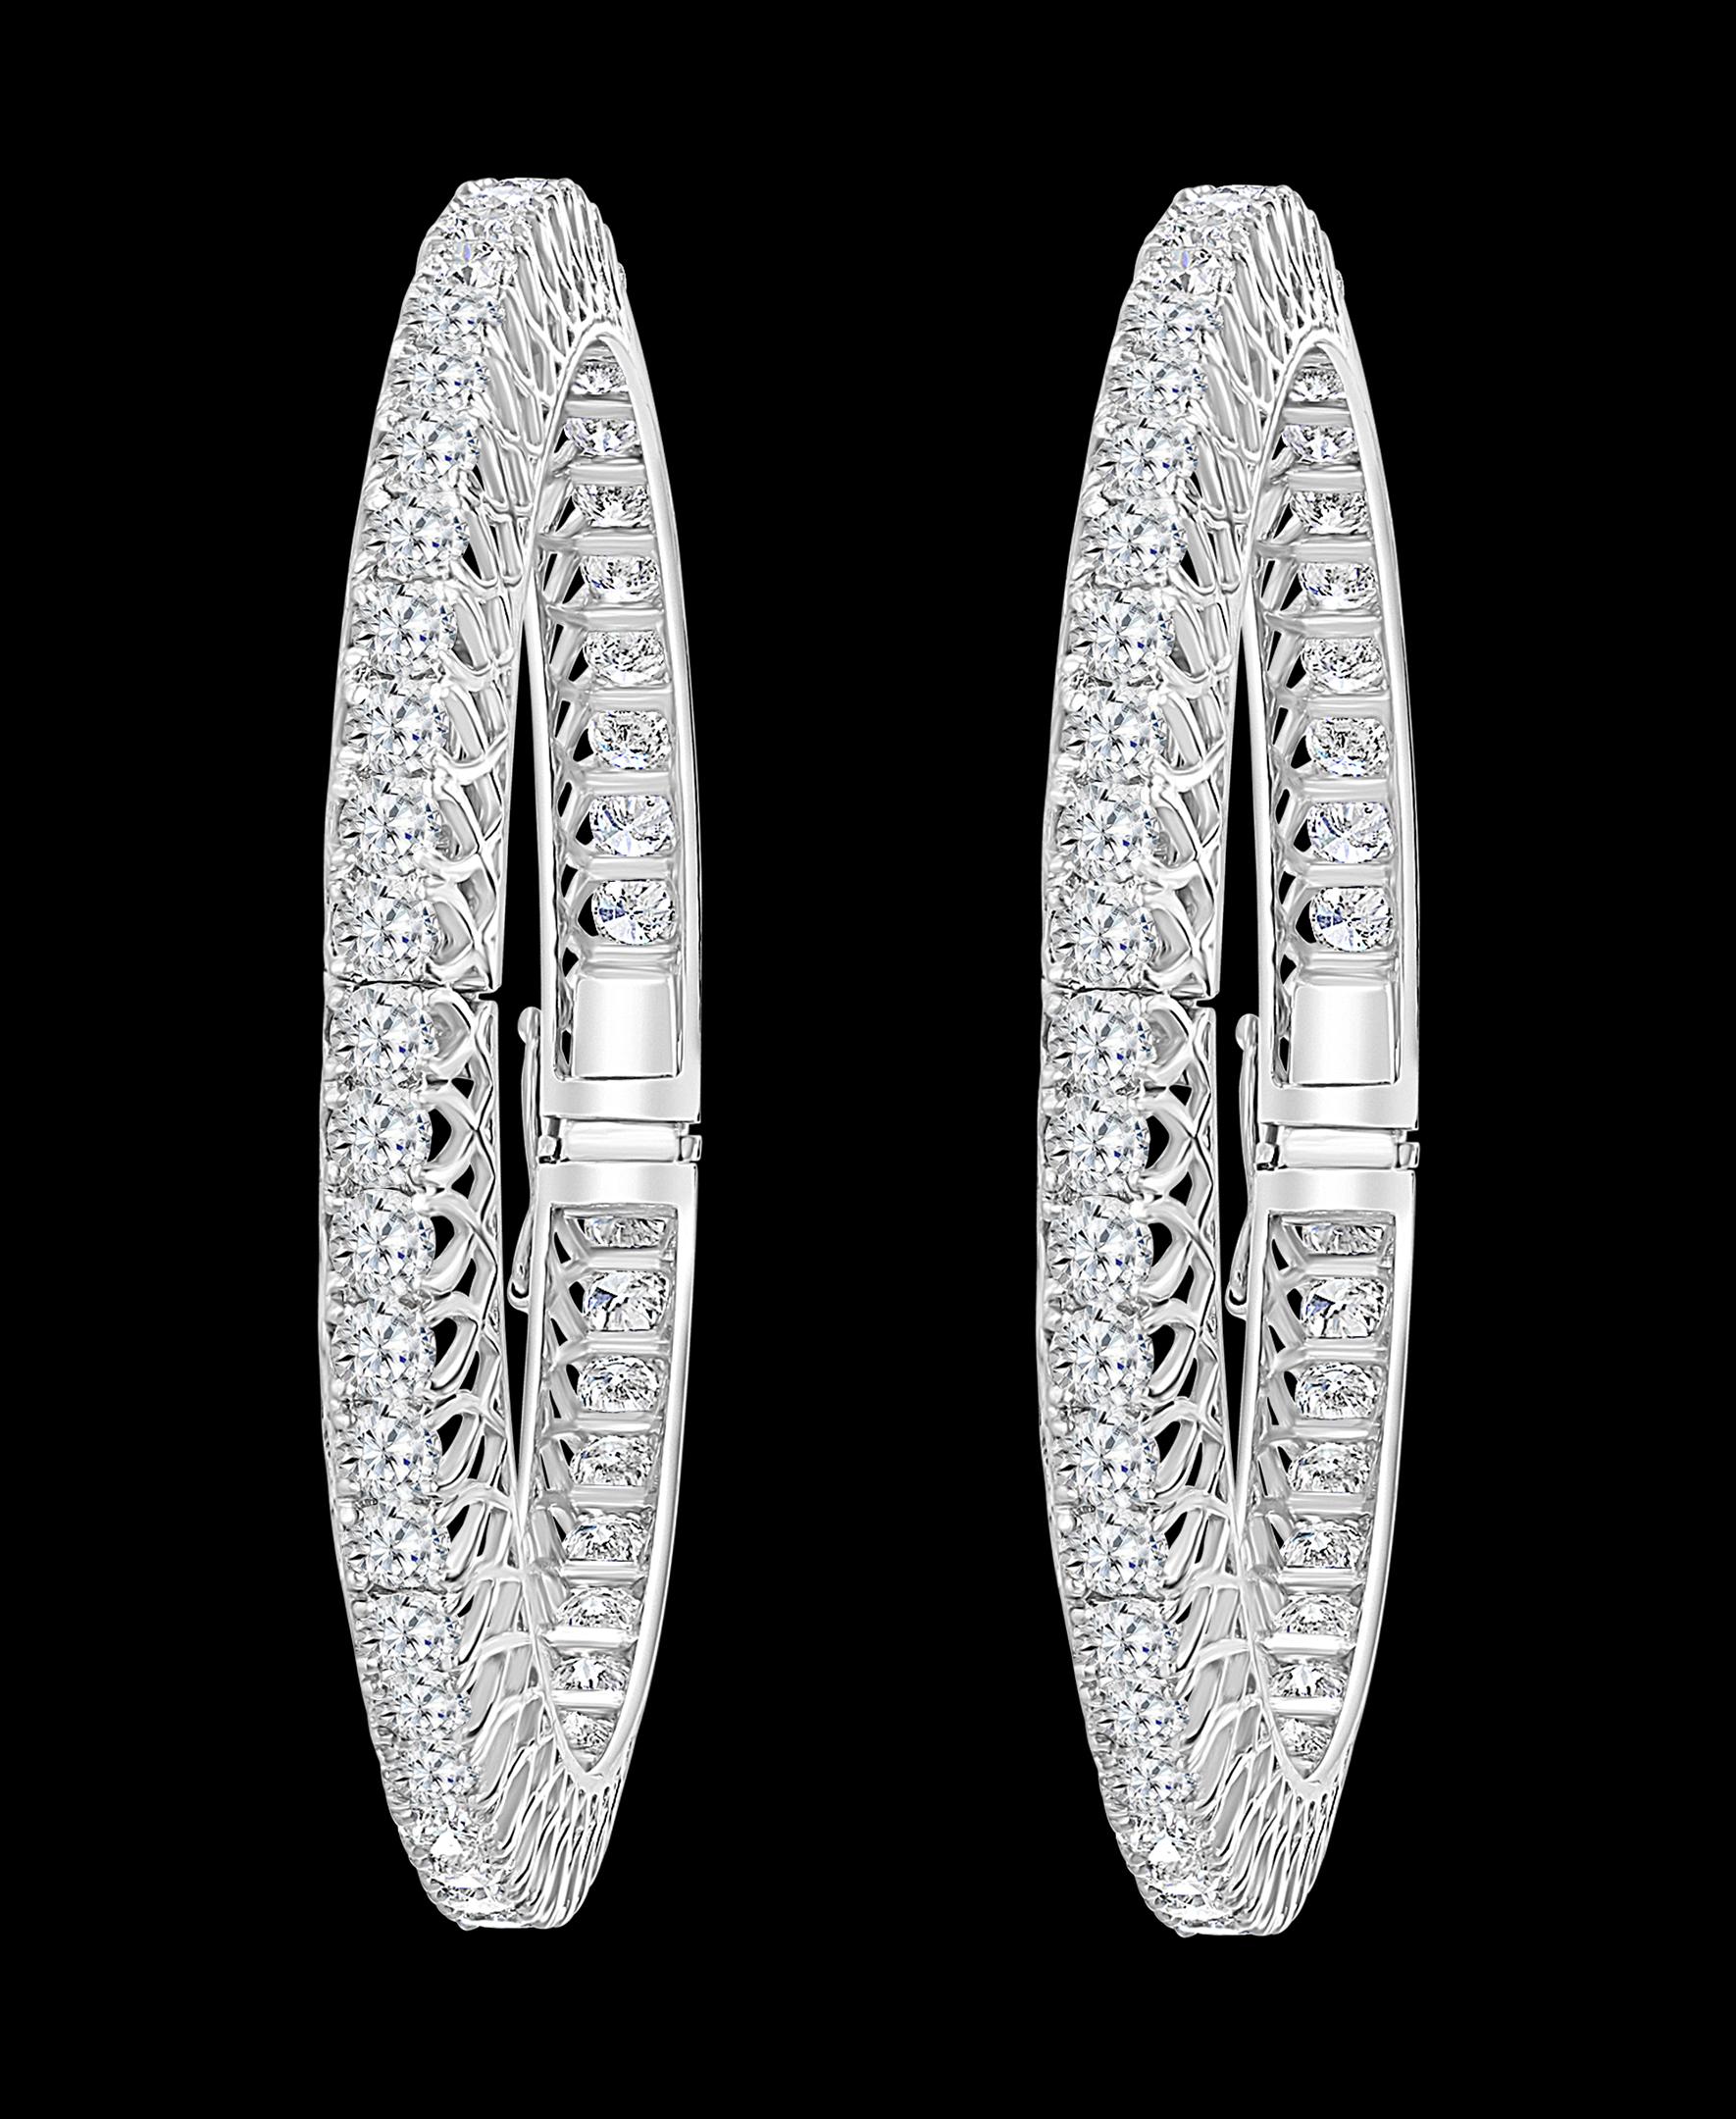 40 Pointer Each, 36 Ct Single line Eternity 18 Kt Gold and Diamond Bangle, Pair 7